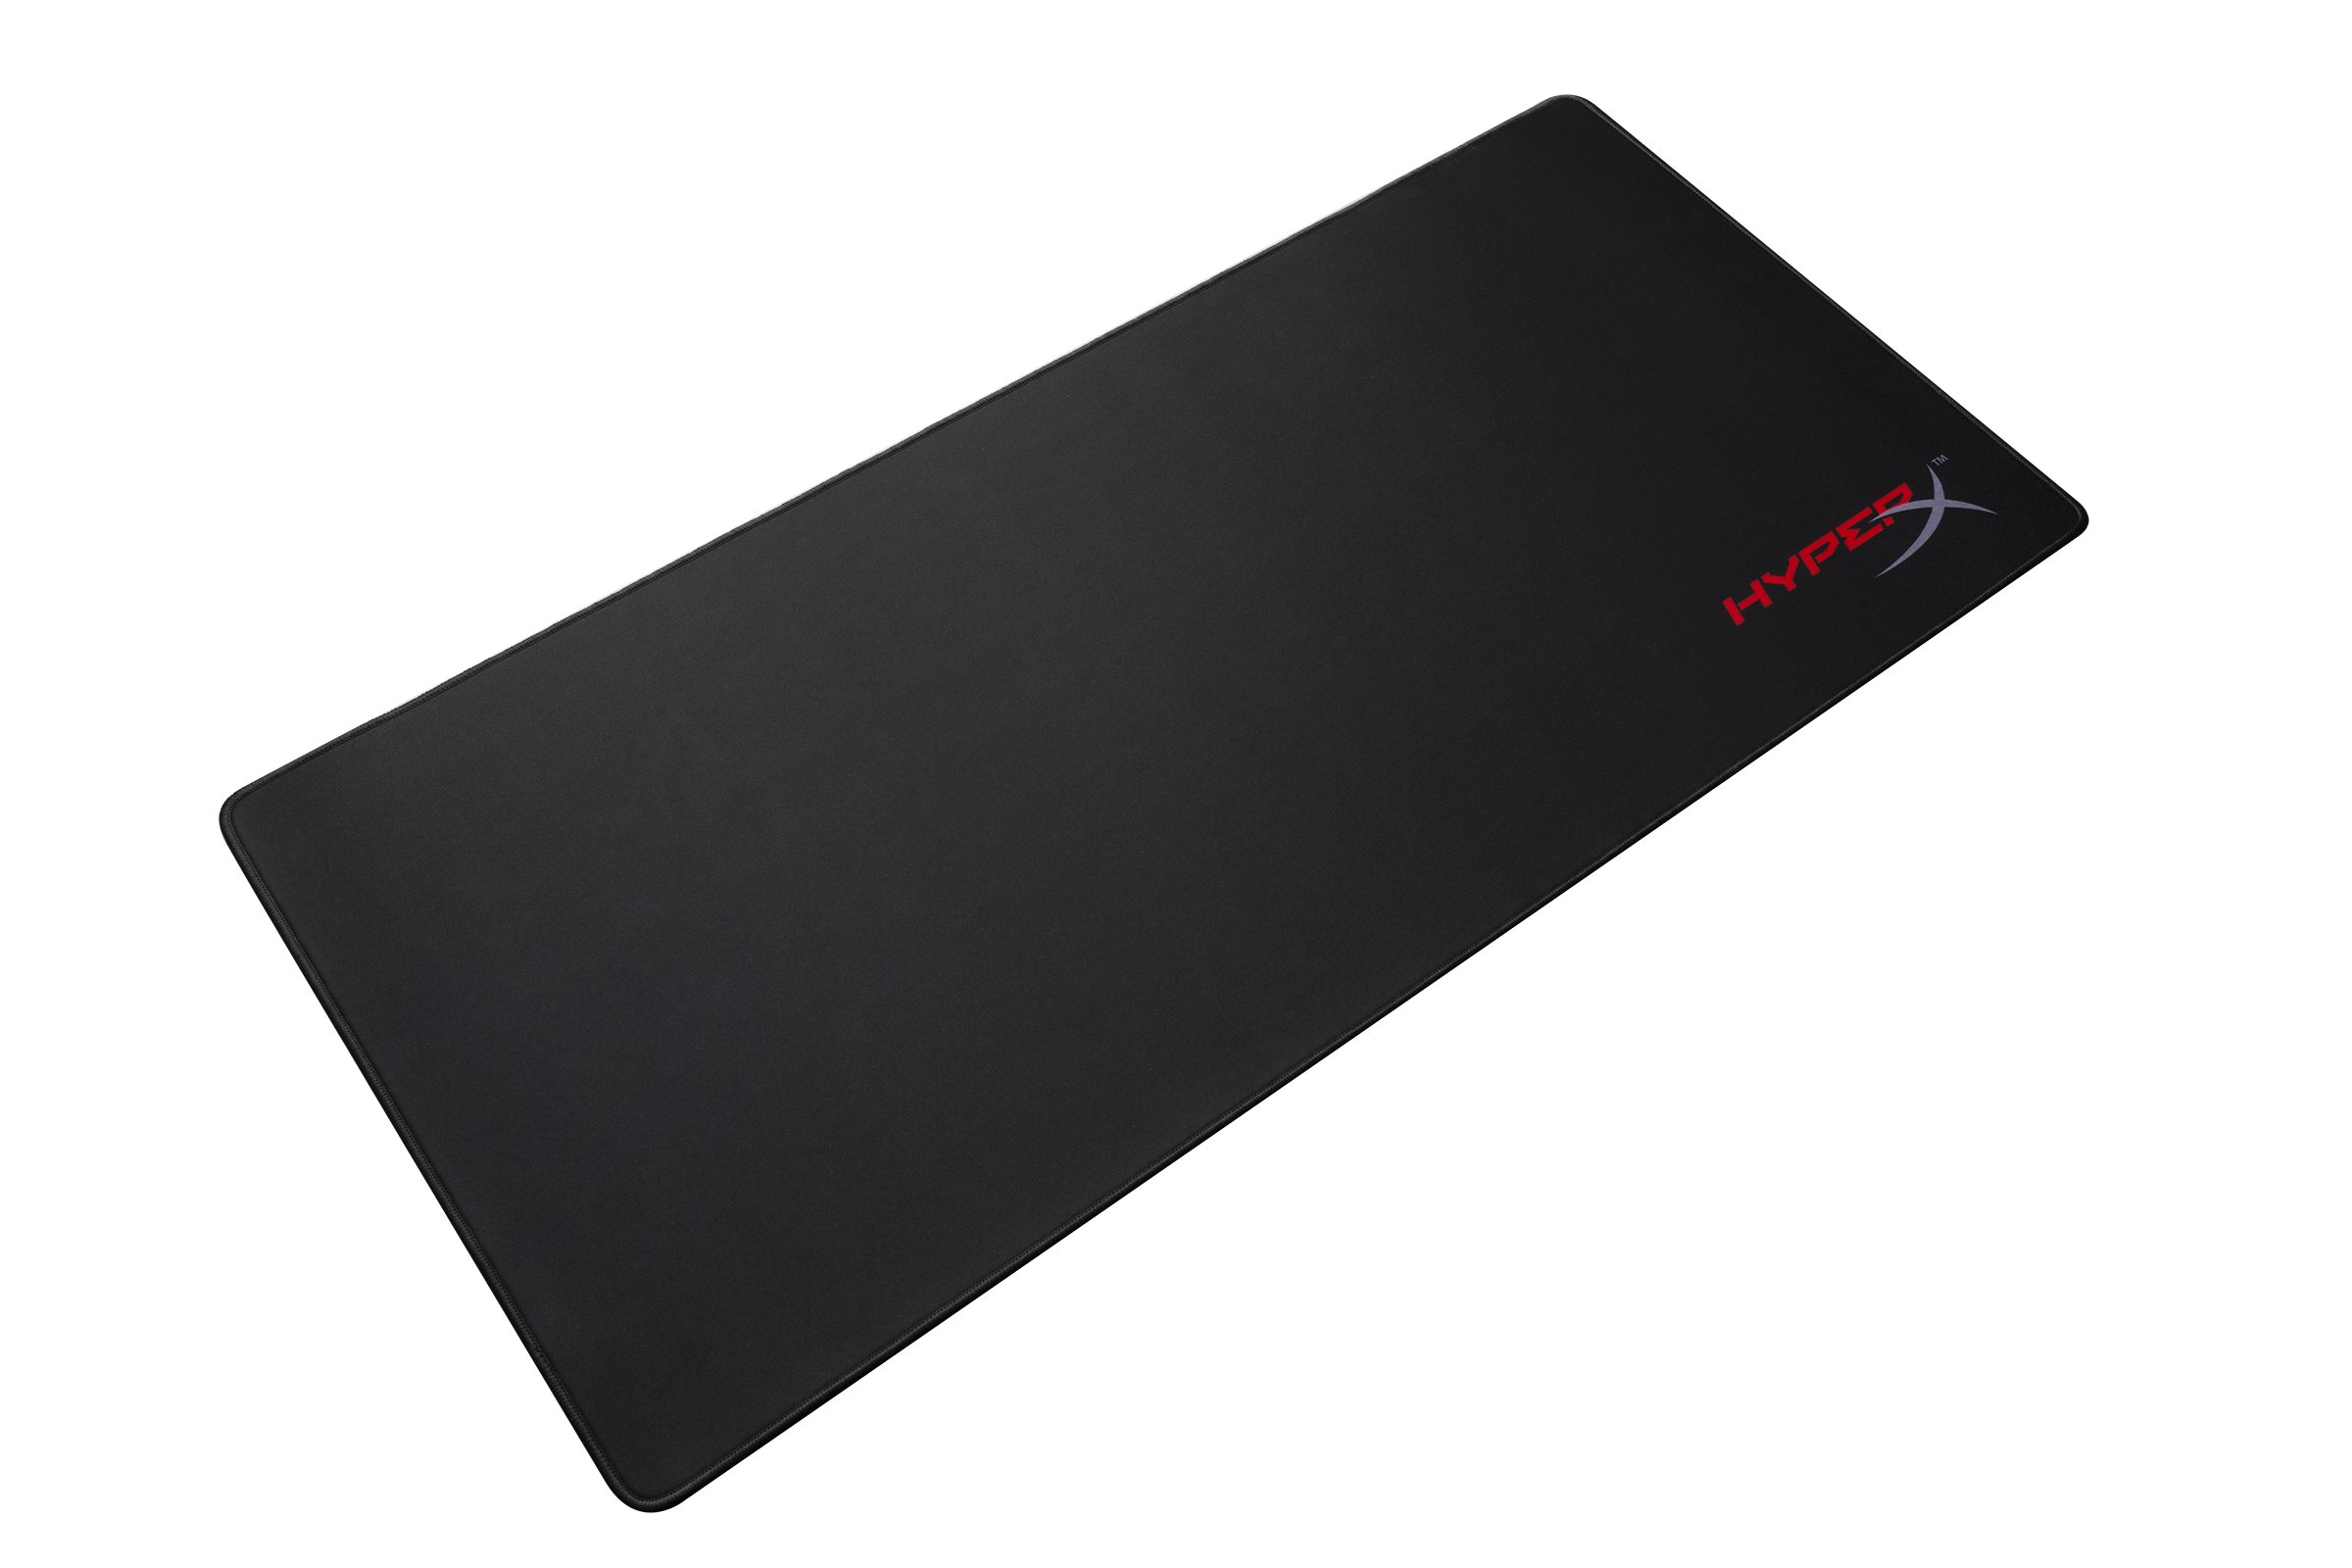 HyperX Fury S - Pro Gaming Mouse Pad, Cloth Surface Optimized for Precision, Stitched Anti-Fray Edges, X-Large 900x420x4mm